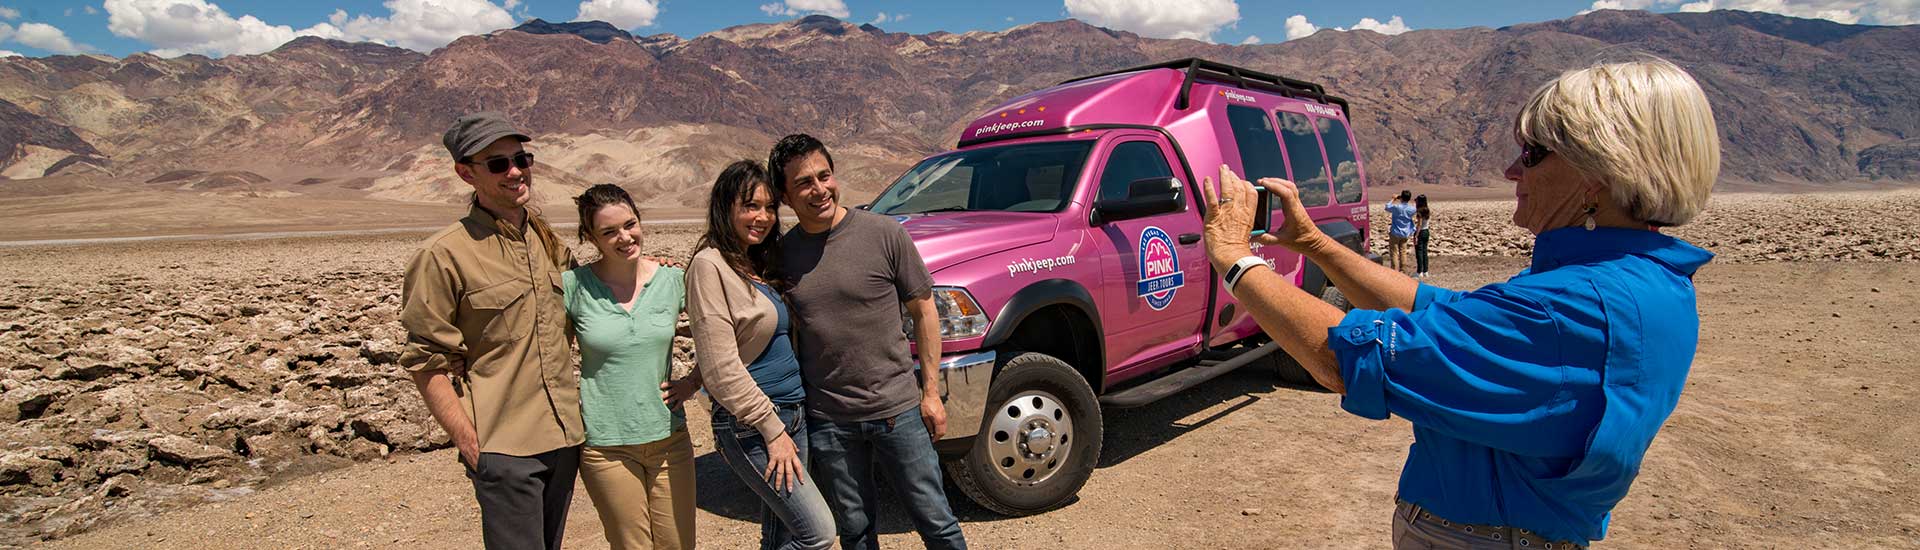 Tour guide taking guests' photo next to Pink Adventure Tour Trekker at the Devil’s Golf Course, Death Valley National Park.